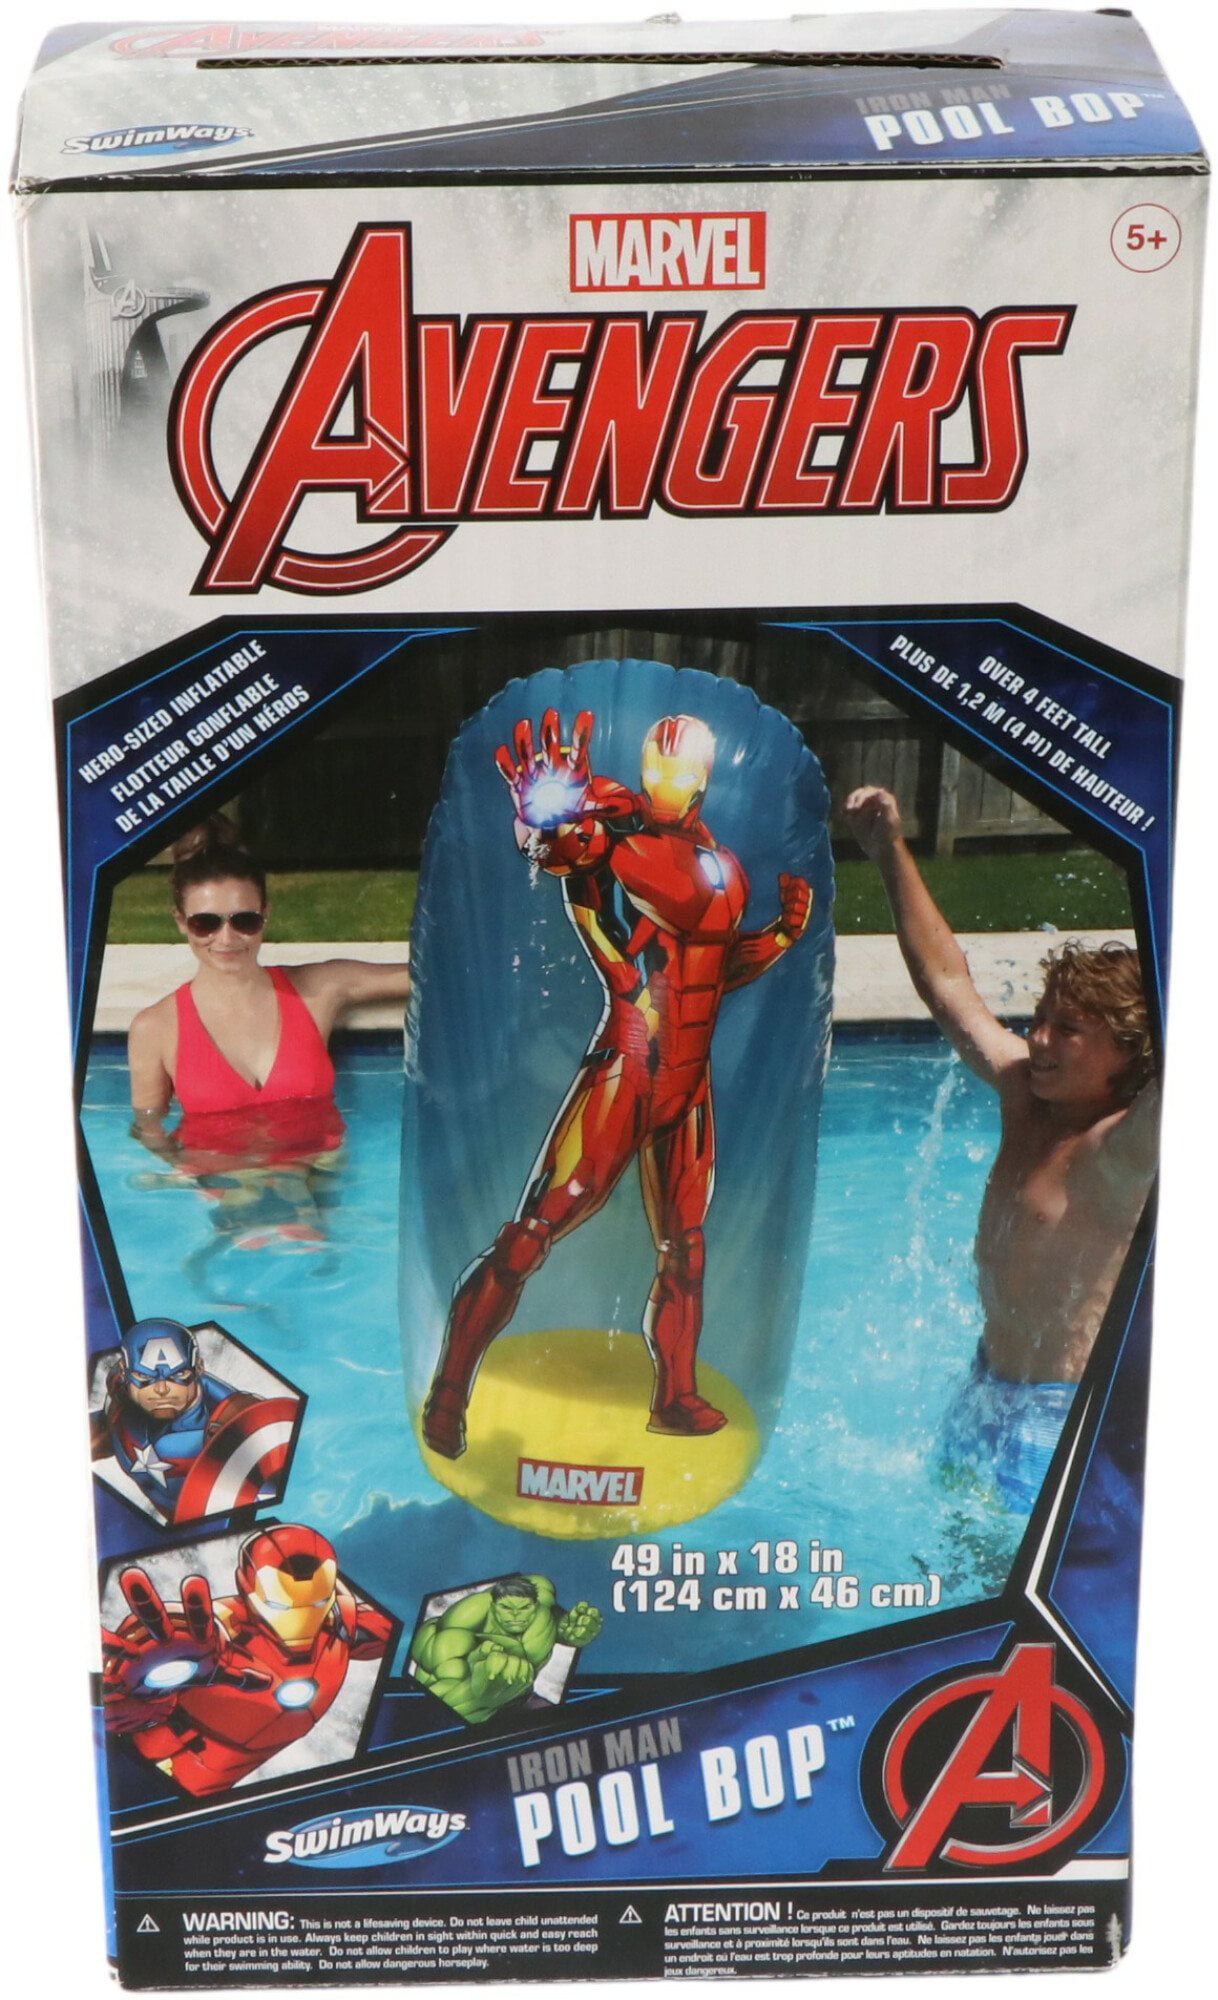 Brand New Marvel Avengers Inflatable Set of Pool Arm Floats w/ Repair Kit 